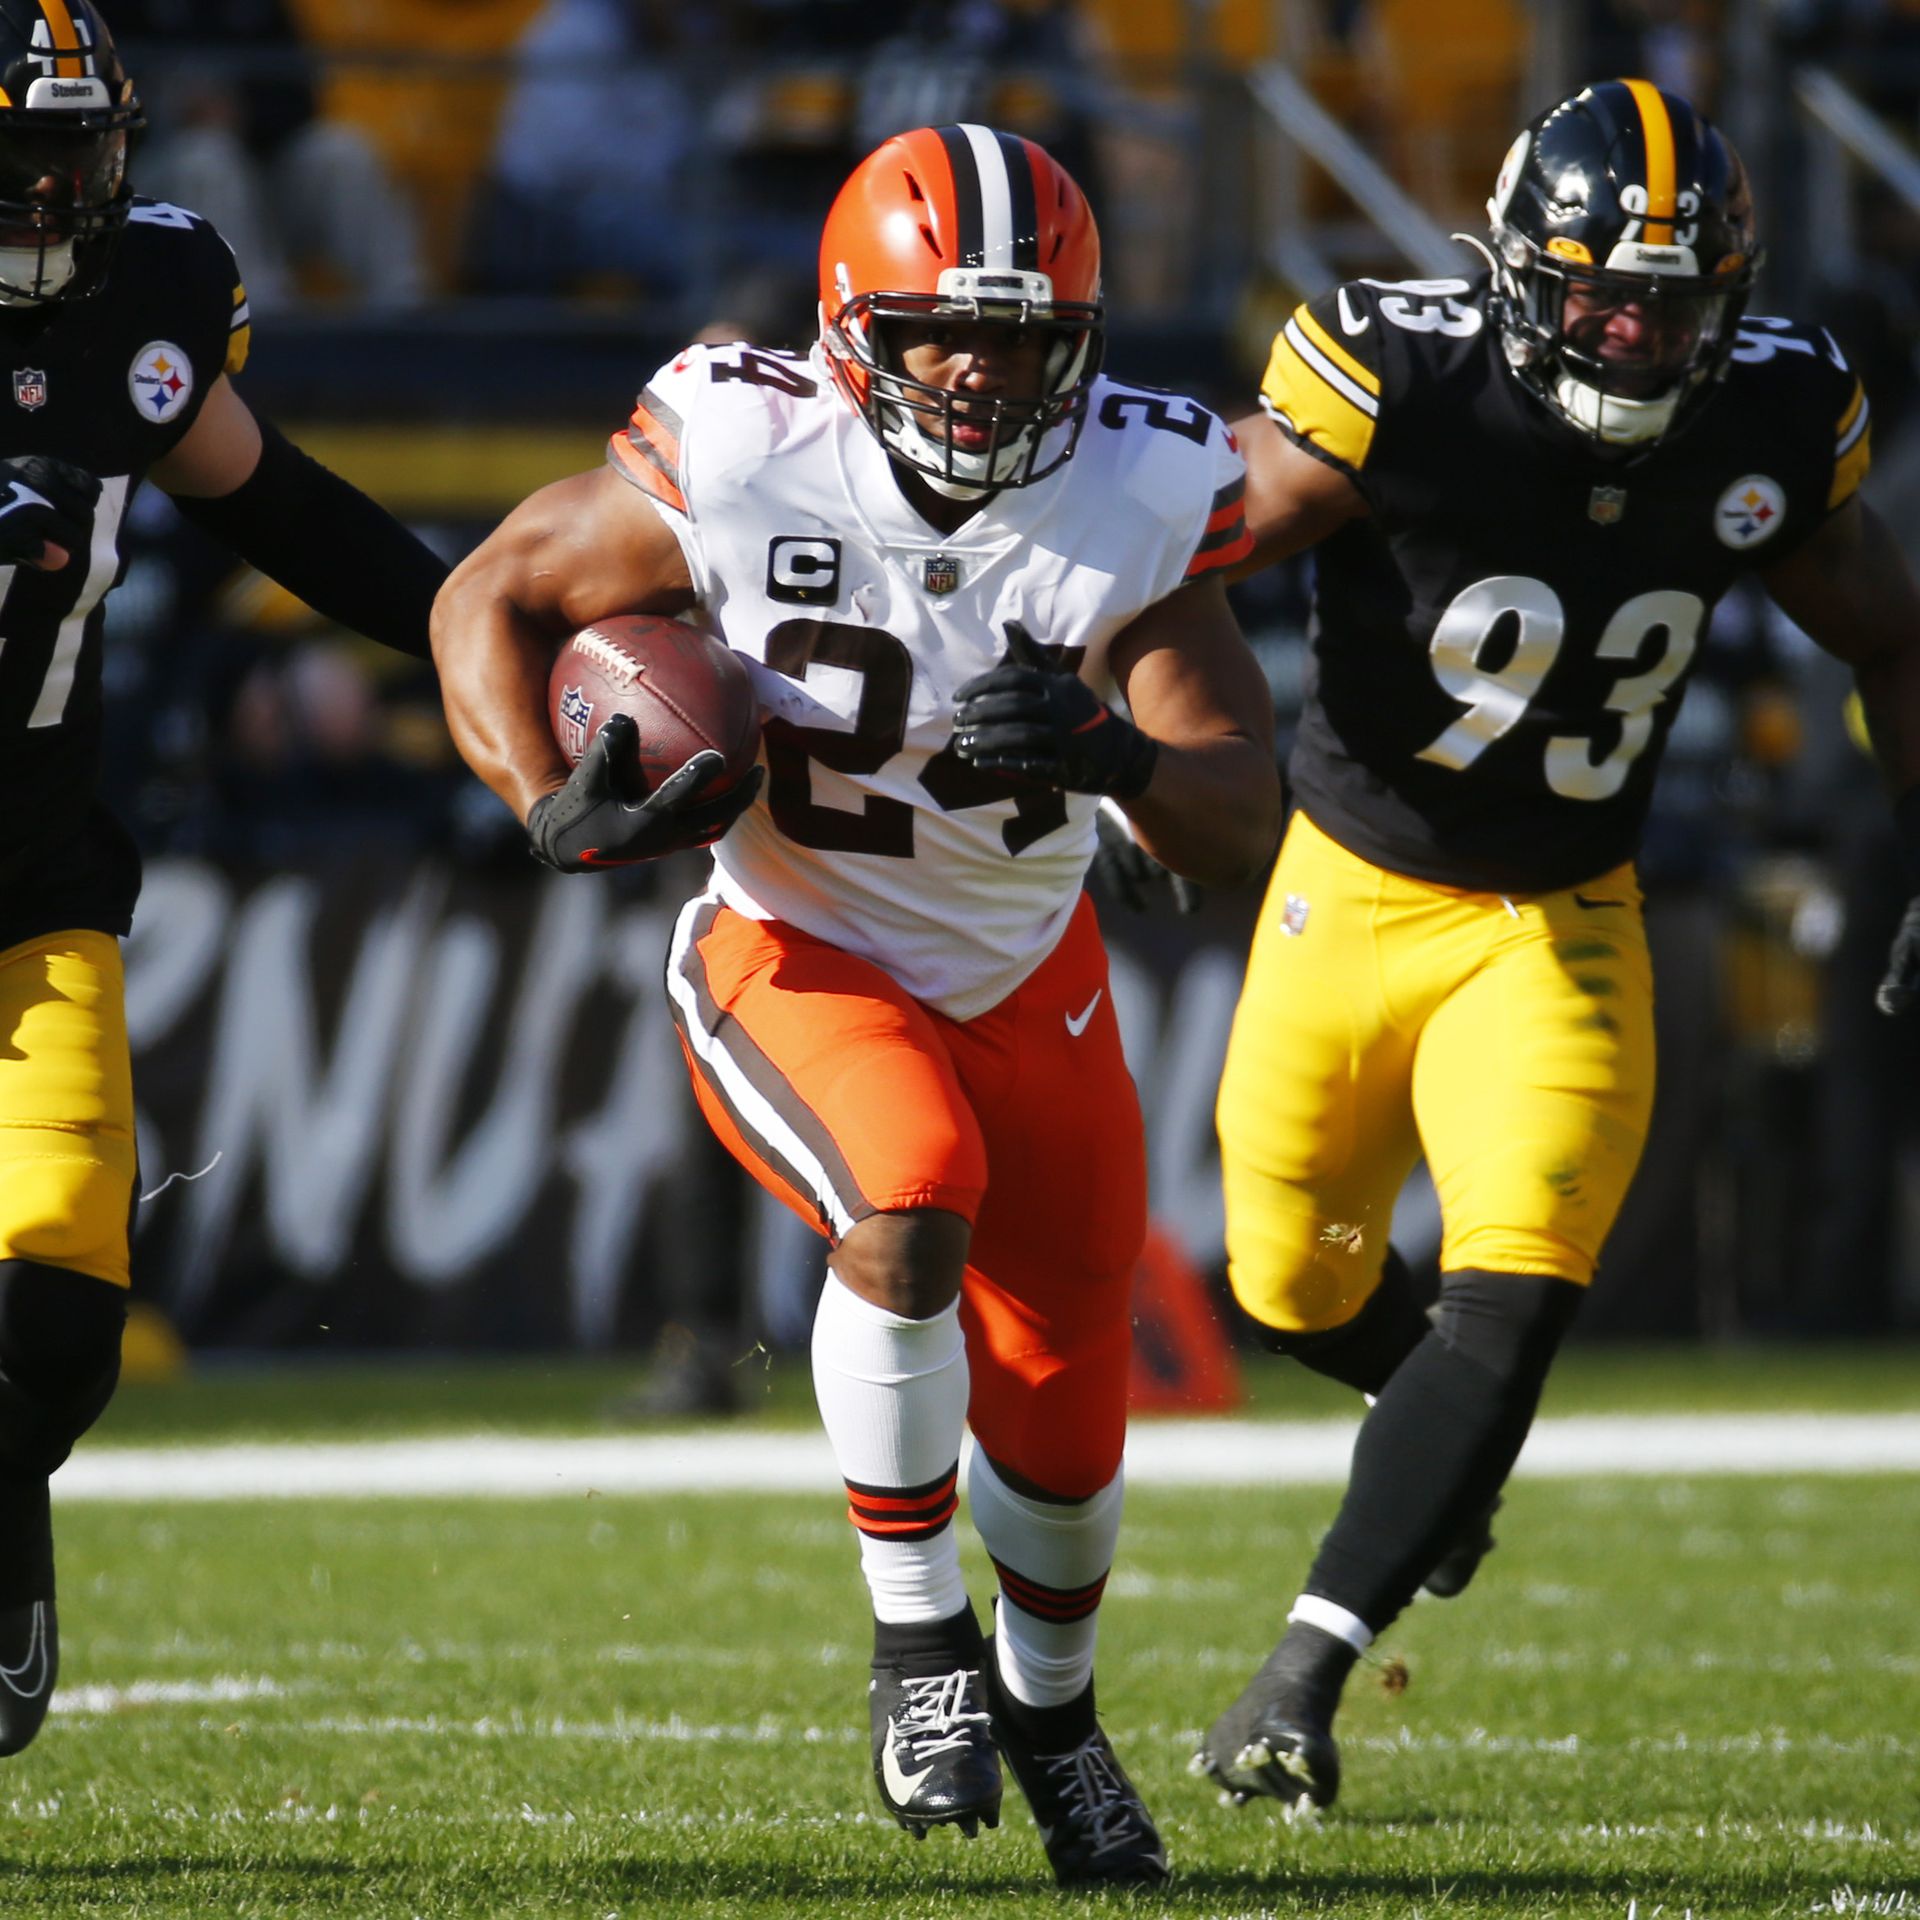 What to expect in Browns vs Steelers Monday Night Football game - Axios  Cleveland